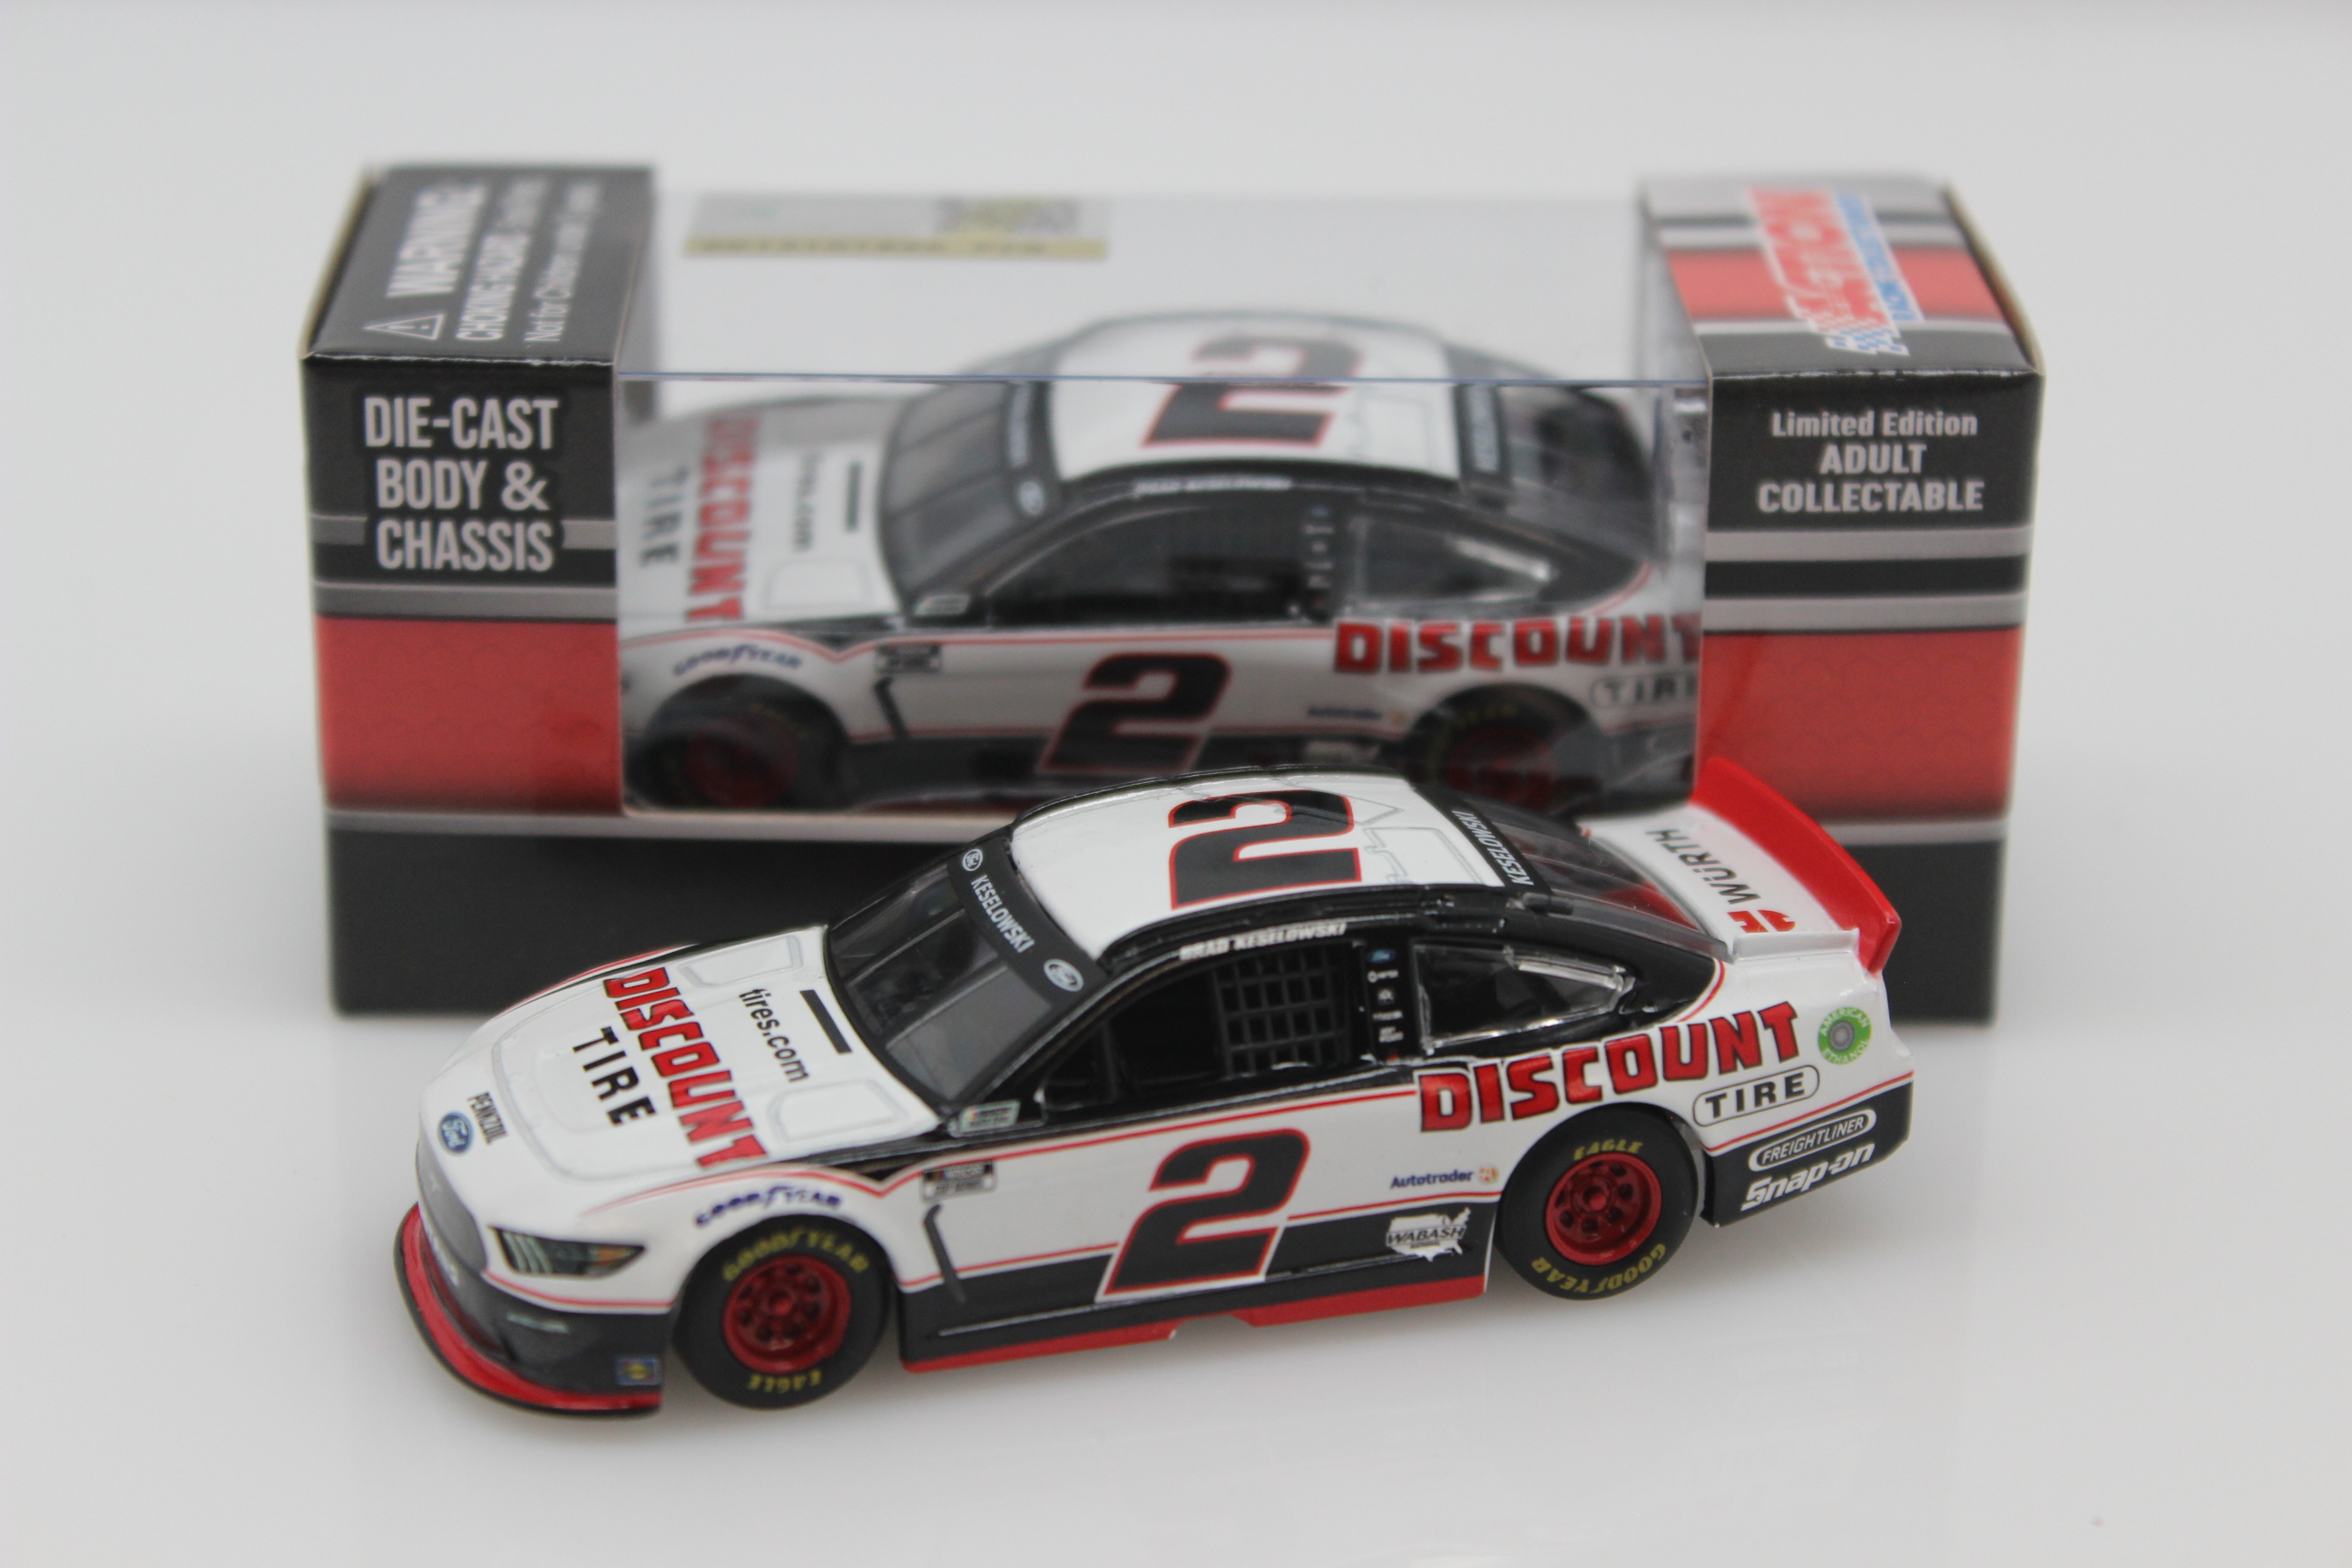 Lionel Racing Brad Keselowski #22 Tire 2016 Ford Mustang NASCAR Diecast Car 1:64 Scale 